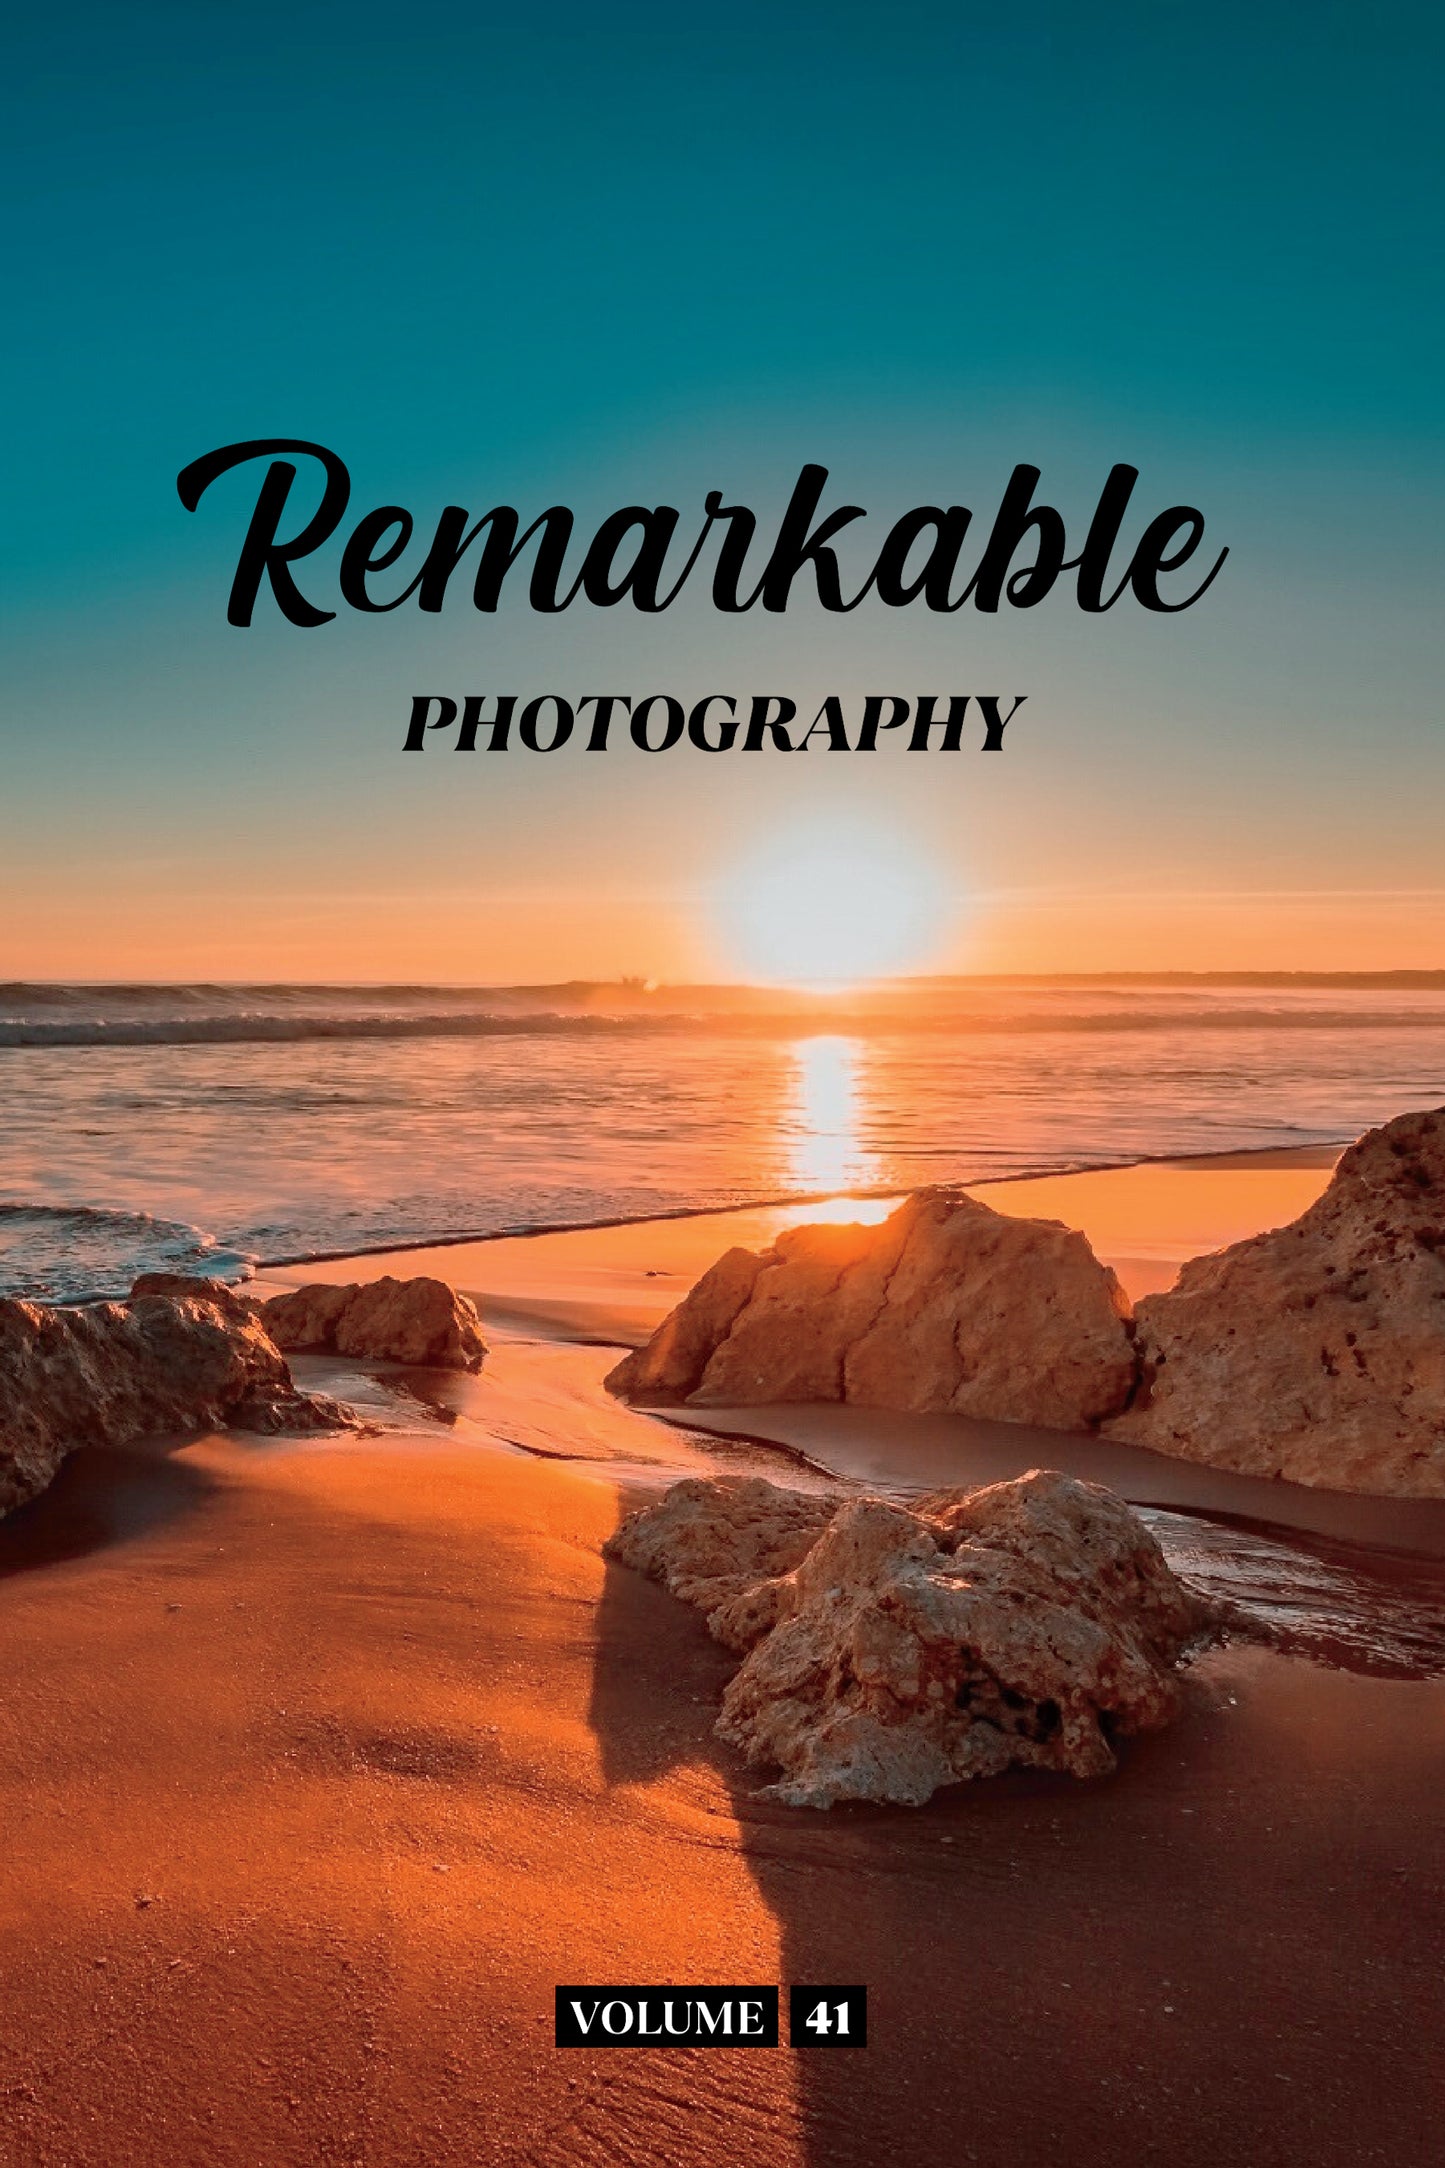 Remarkable Photography Volume 41 (Physical Book Pre-Order)